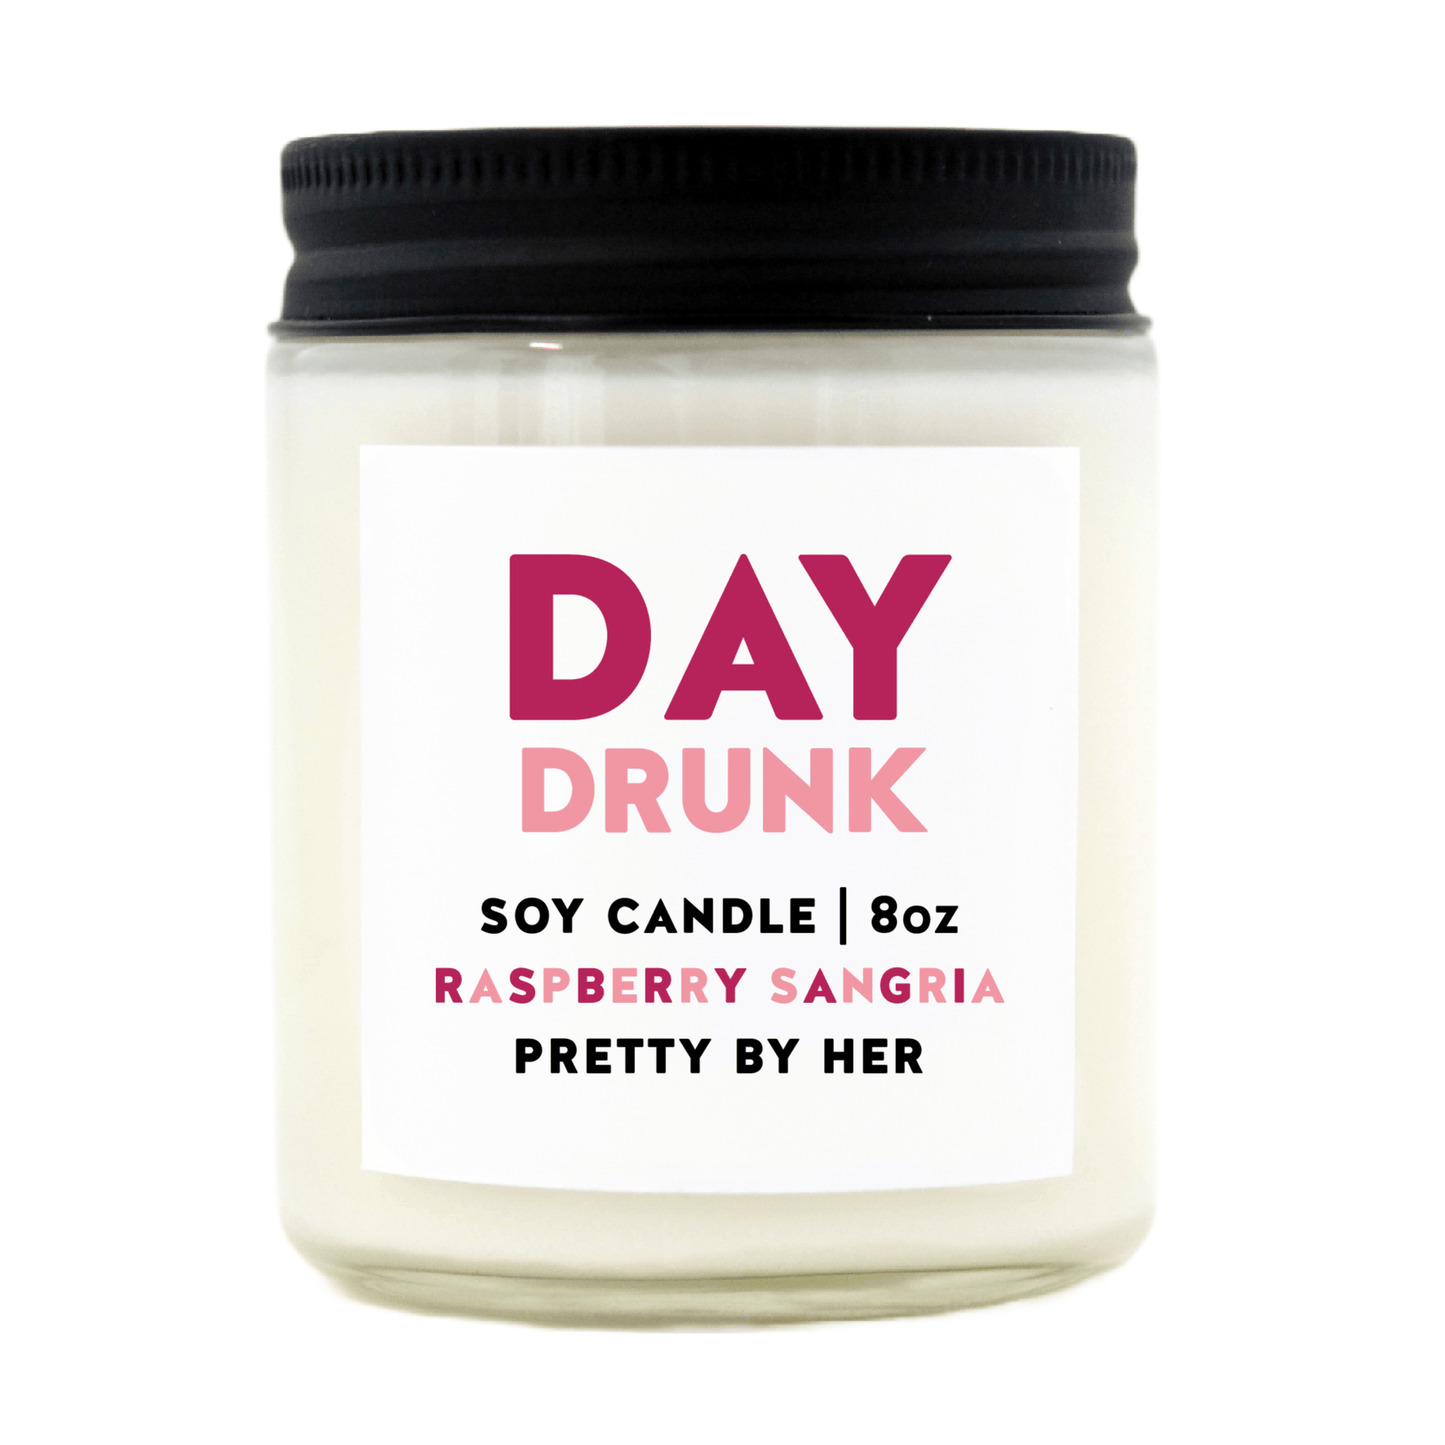 DAY DRUNK CANDLE / Raspberry Sangria